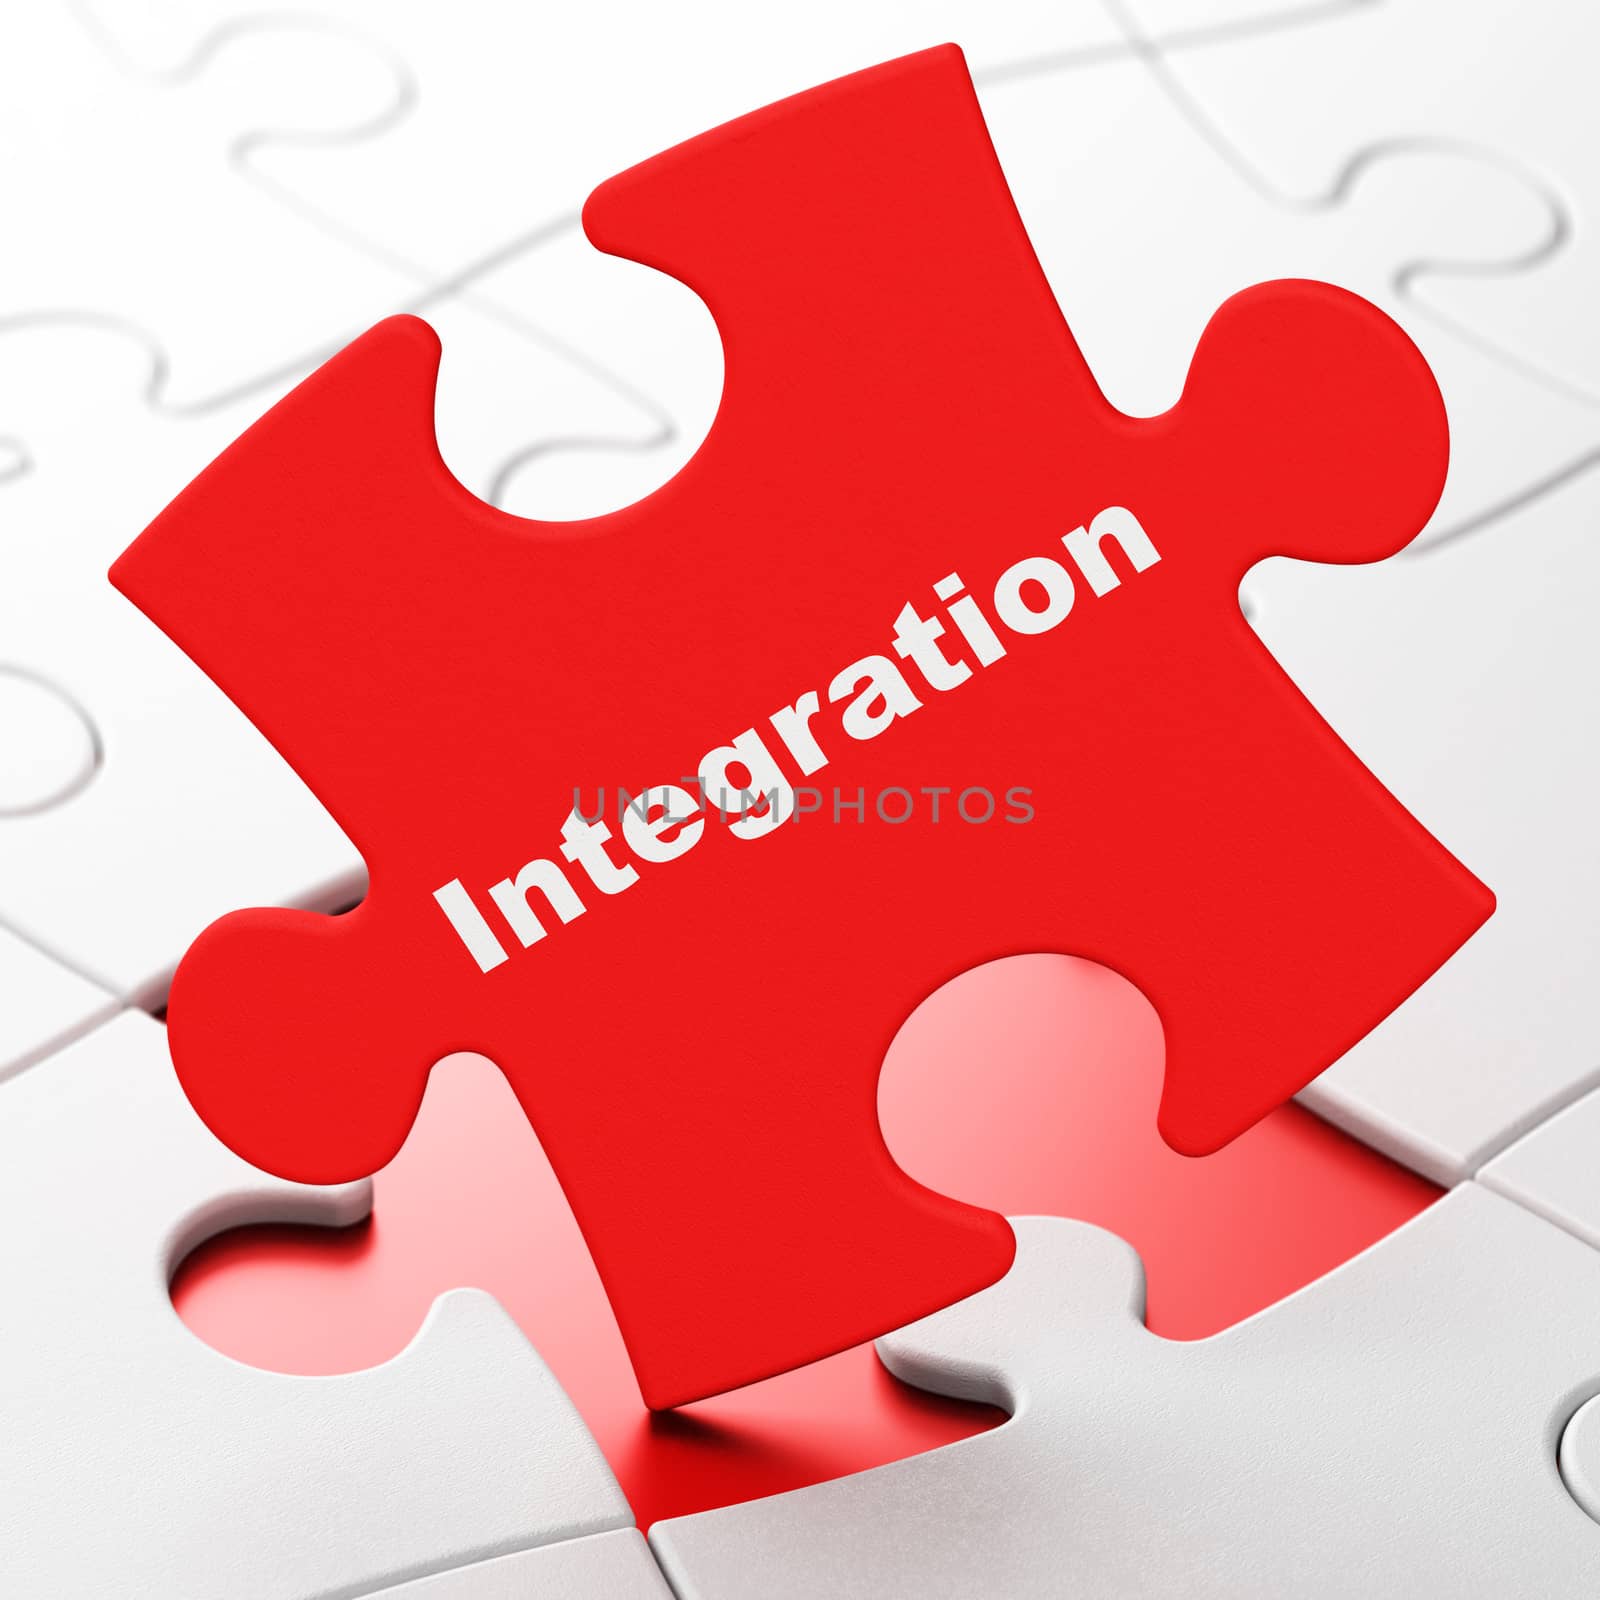 Business concept: Integration on puzzle background by maxkabakov